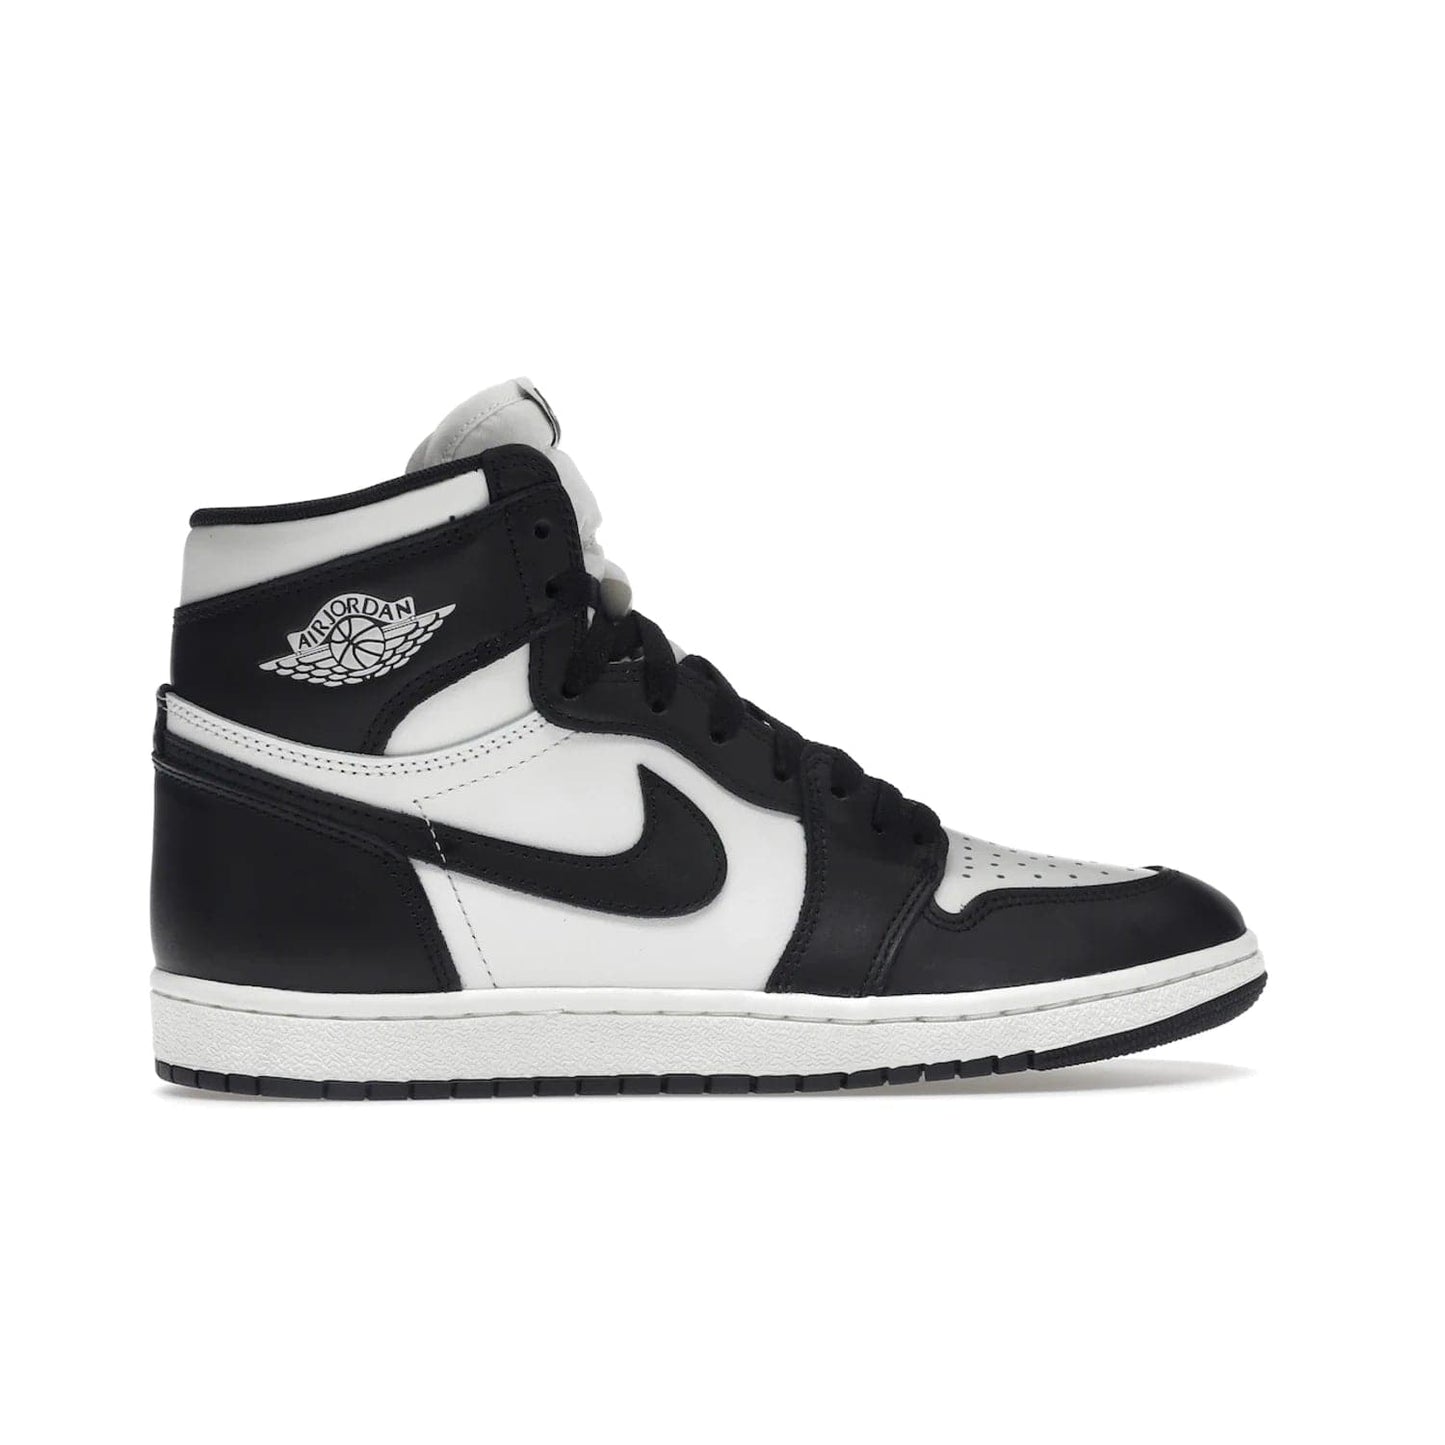 Jordan 1 Retro High 85 Black White (2023) - Image 36 - Only at www.BallersClubKickz.com - Brand new Jordan 1 Retro High 85 Black White (2023) now available. A classic color scheme of black and white leather uppers with signature Nike Air logo on the tongue. Must-have for any Air Jordan fan. Available February 15, 2023.